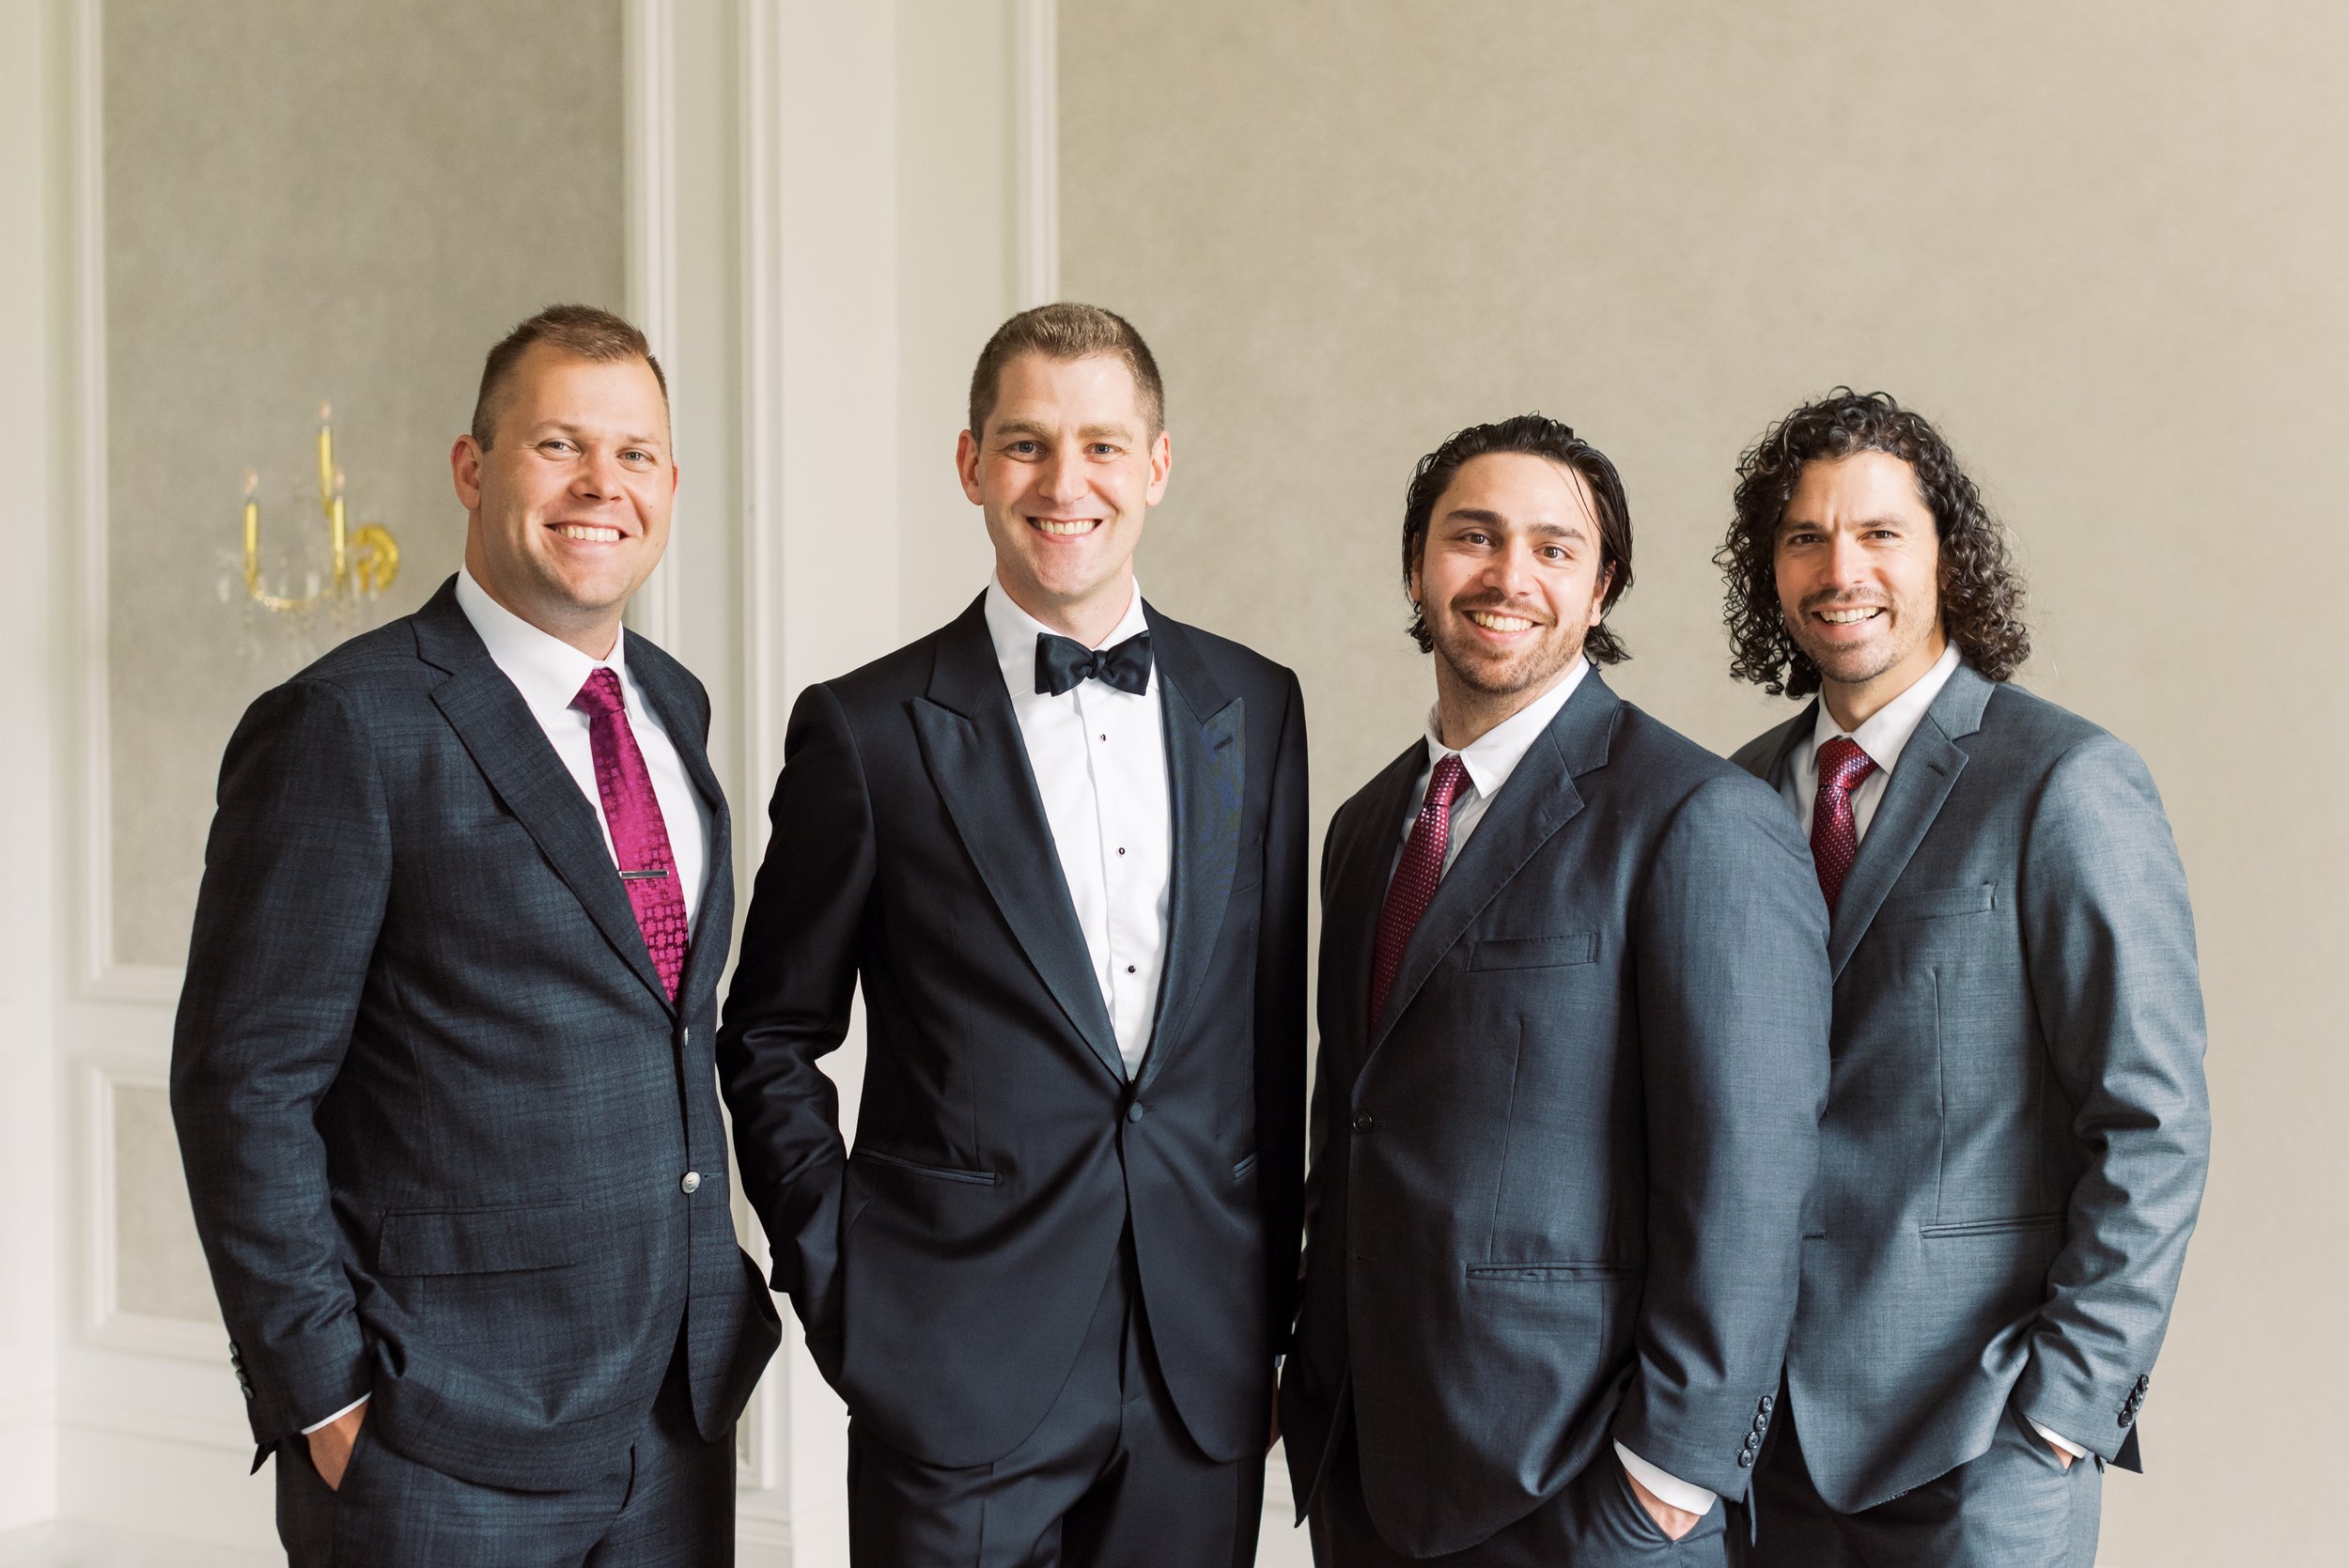 Groomsmen photo at Lord Nelson Hotel in Halifax